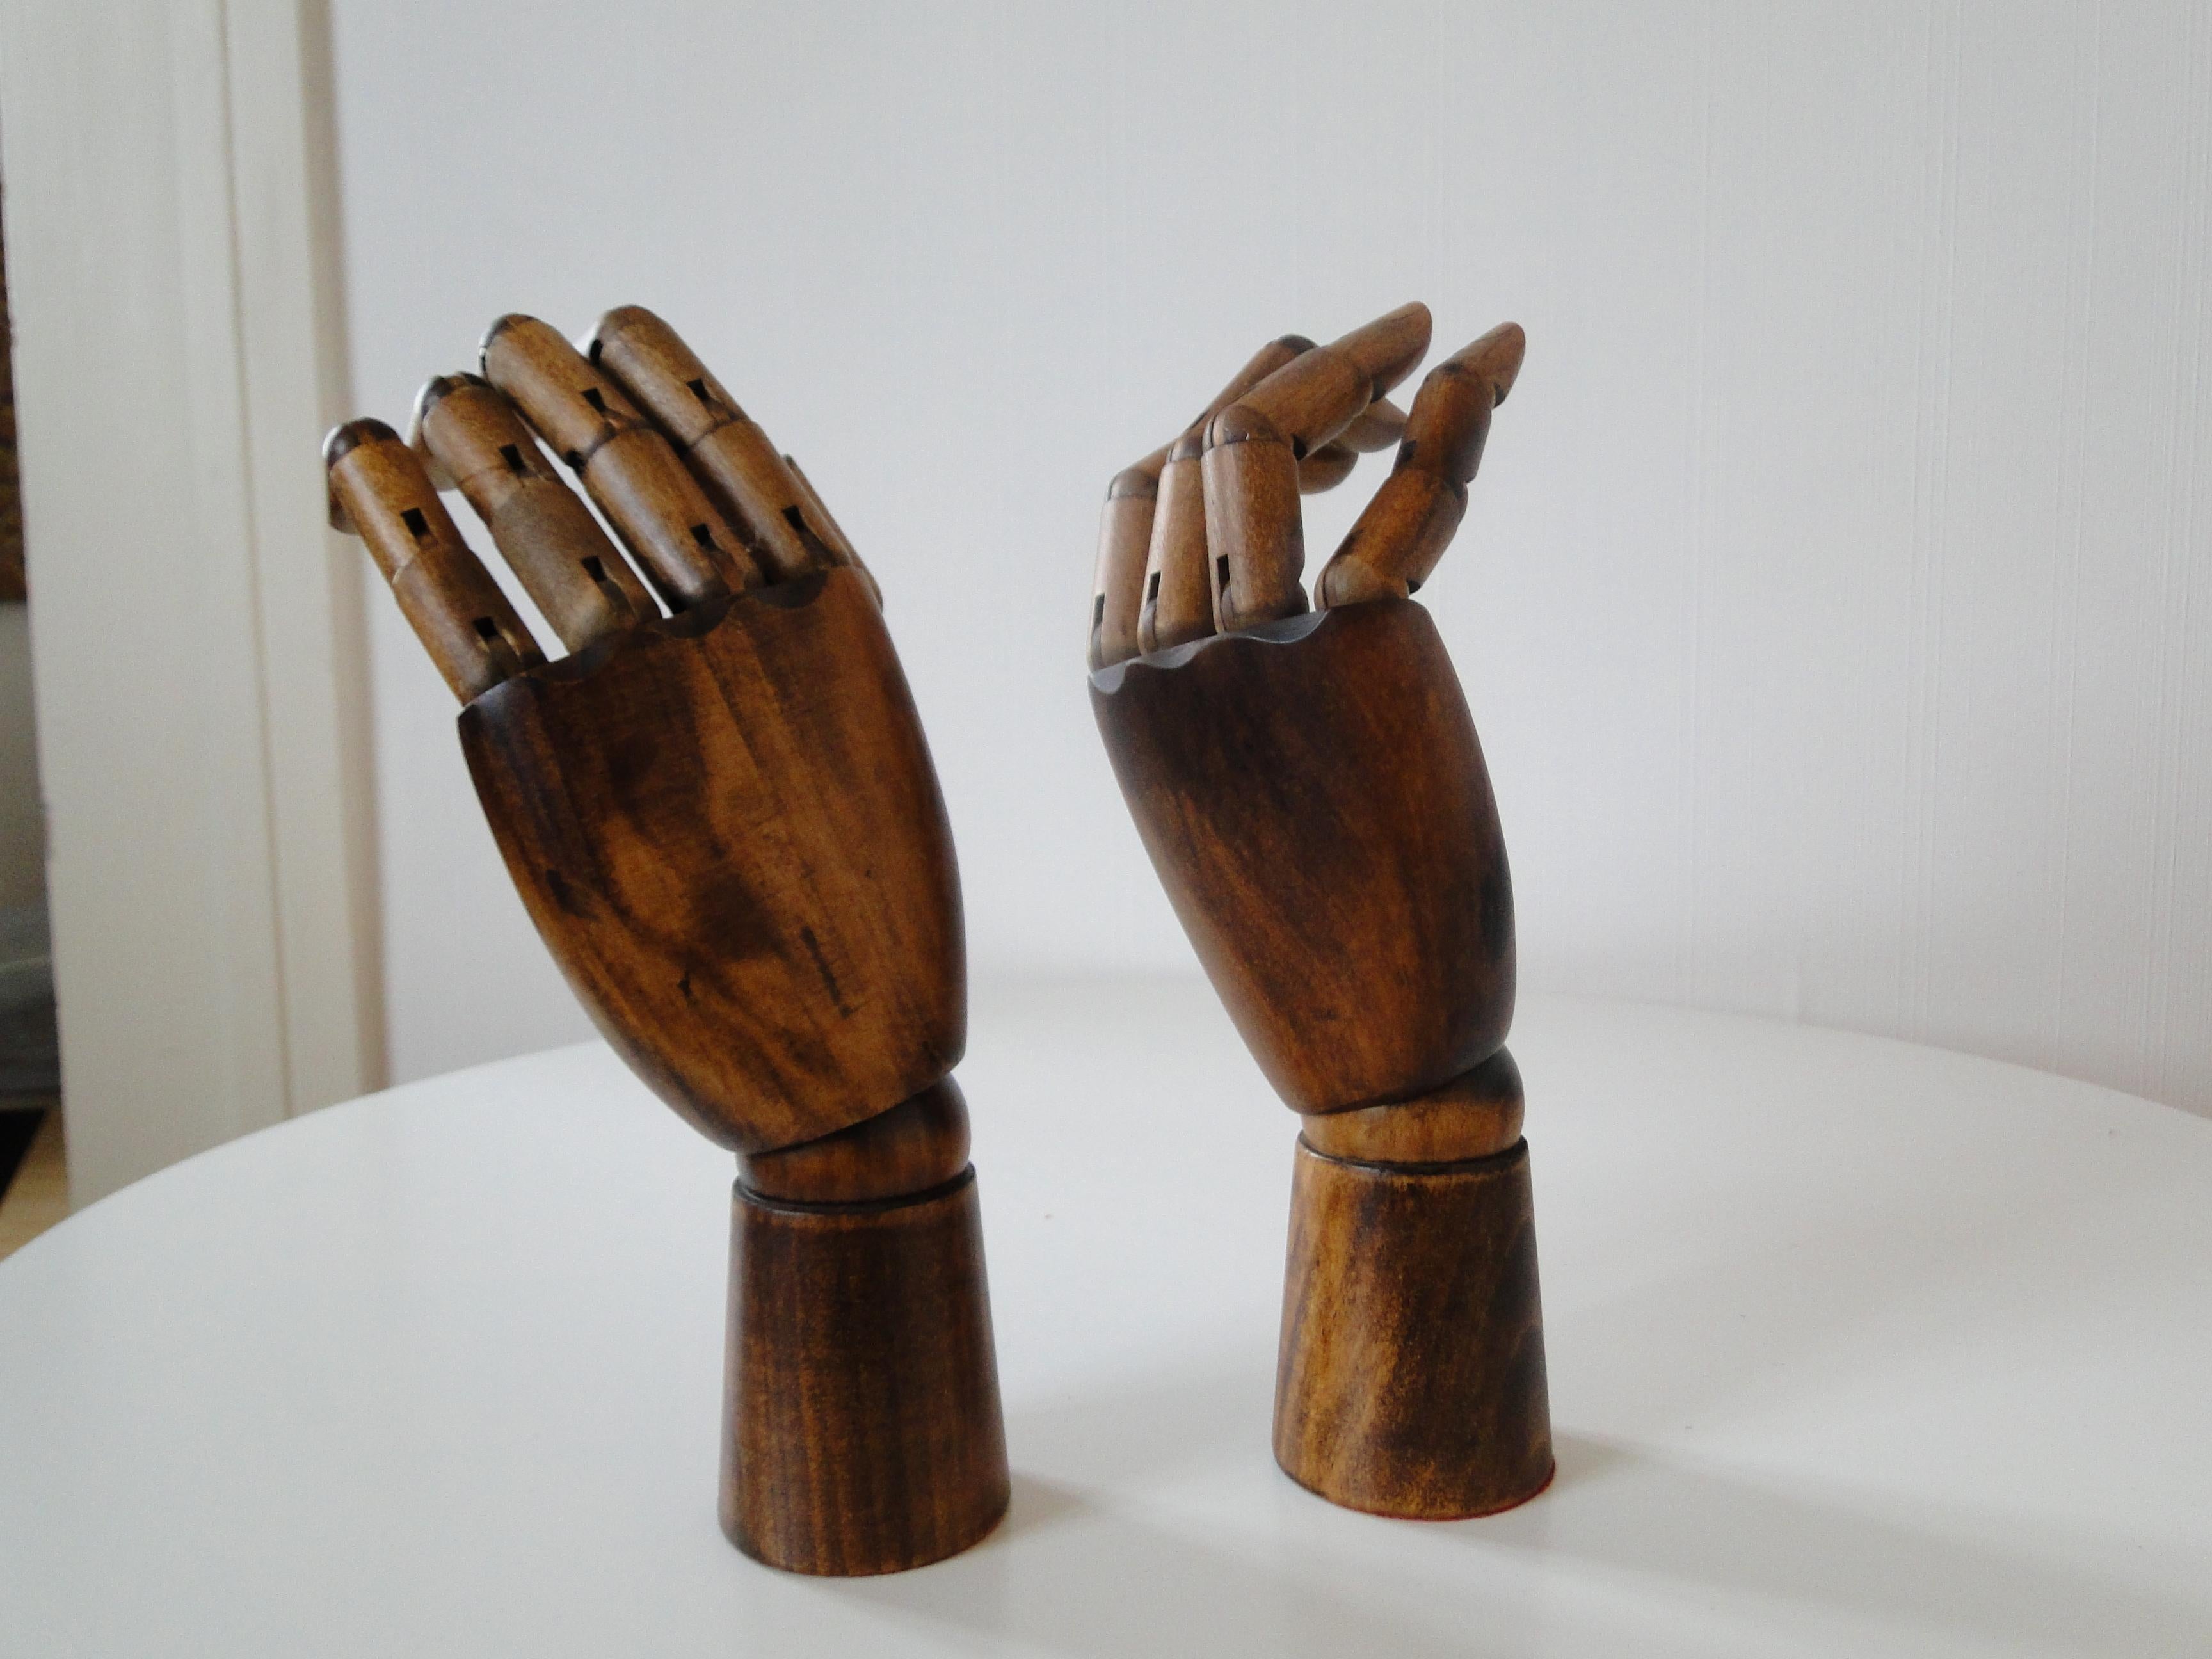 Pair of articulated wooden hands 5